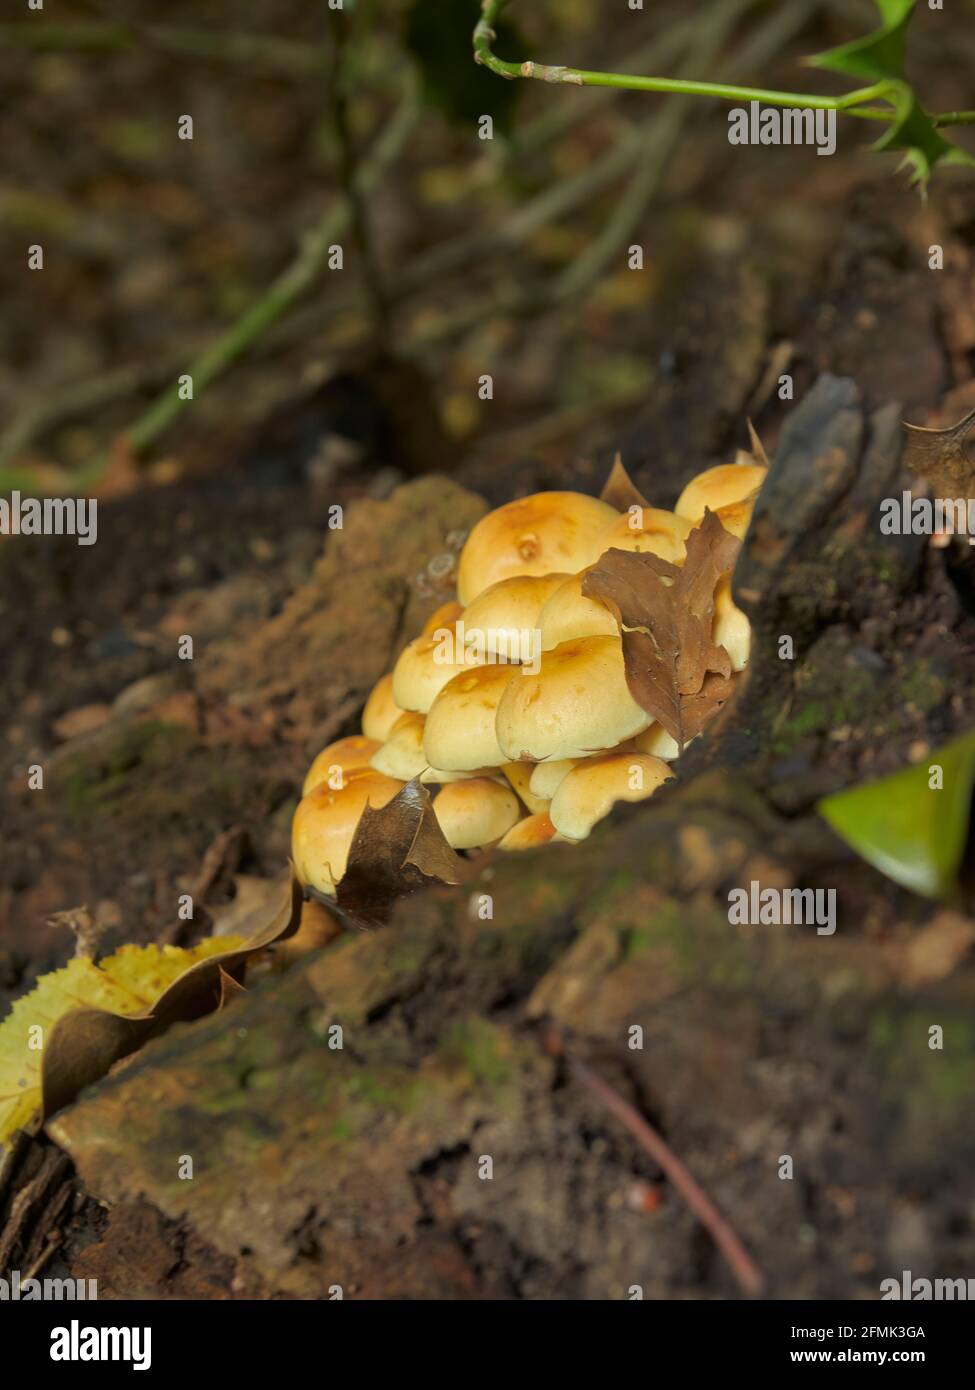 A patch of urban woodland plays host to some honey fungus attached to a  stump surrounded by a leaf-litter strewn forest floor. Stock Photo